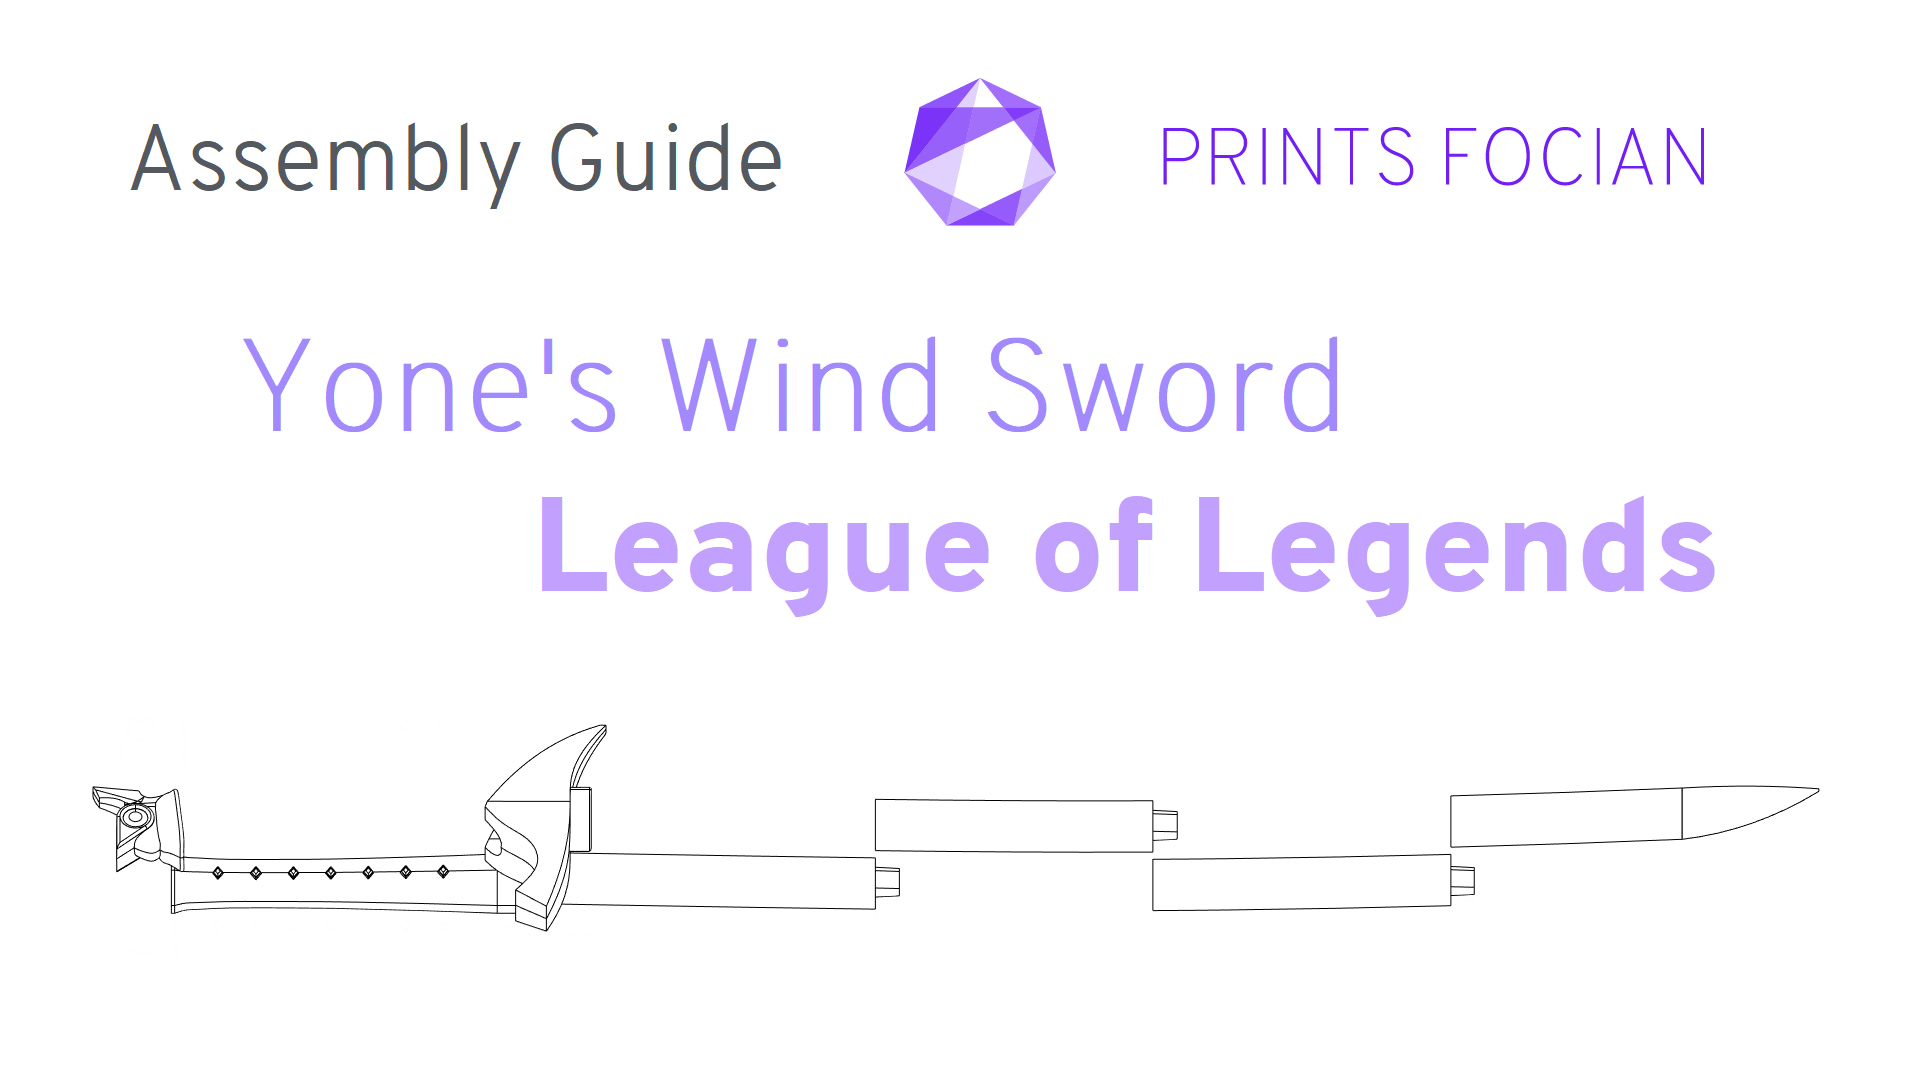 Wireframe image of an exploded Yones Wind Sword on a white background. Prints Focian Icon top and central. Text: Purple Prints Focian, Yones Wind Sword, League of Legends and dark grey Assembly Guide.